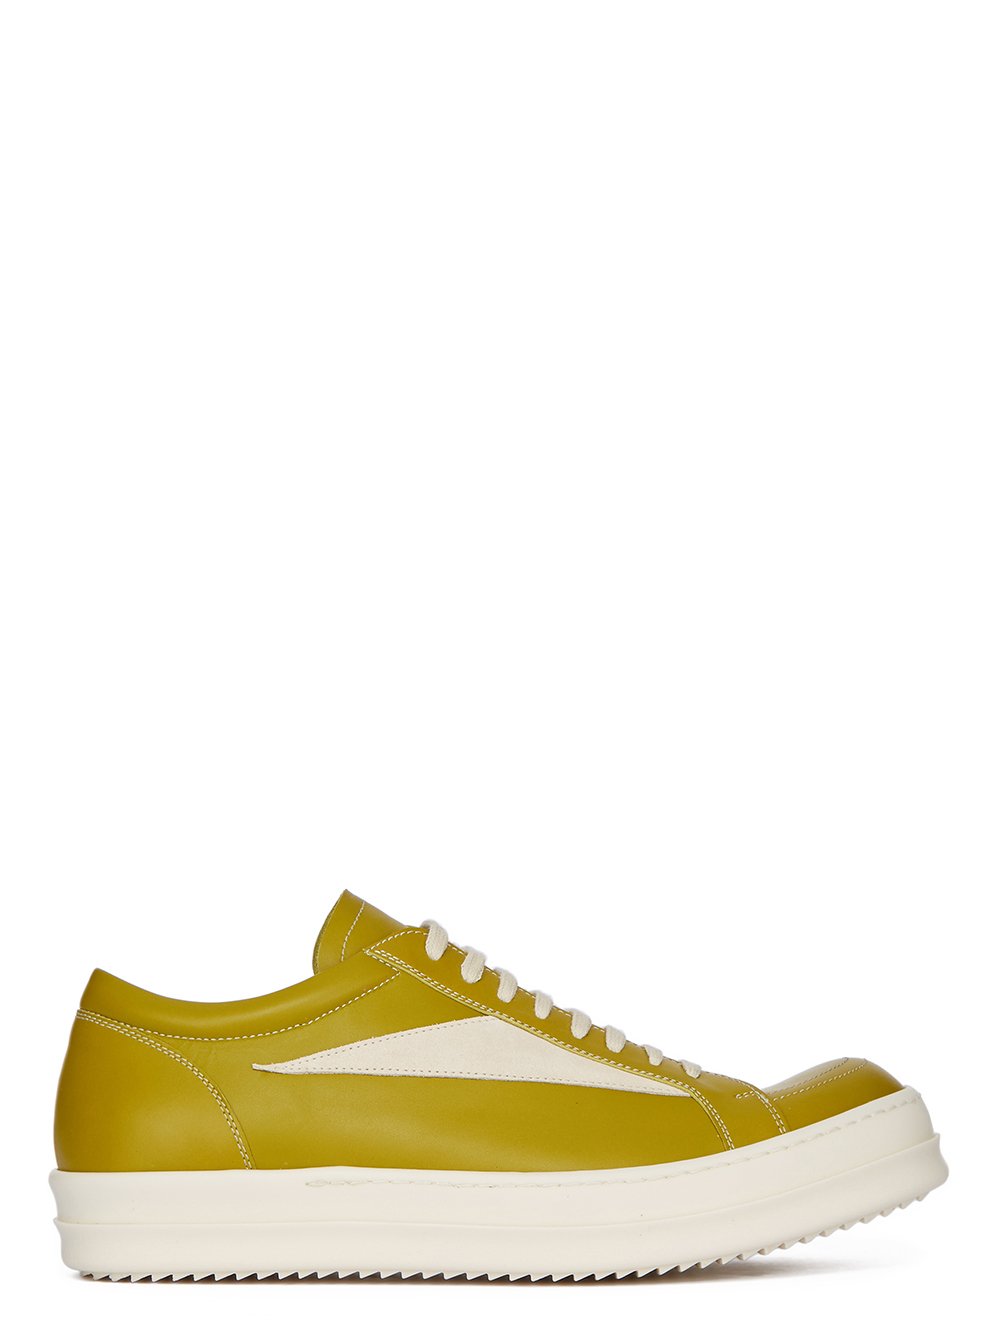 RICK OWENS FW23 LUXOR VINTAGE SNEAKS IN ACID AND MILK CORTINA GREASE CALF LEATHER AND VELOURS SUEDE